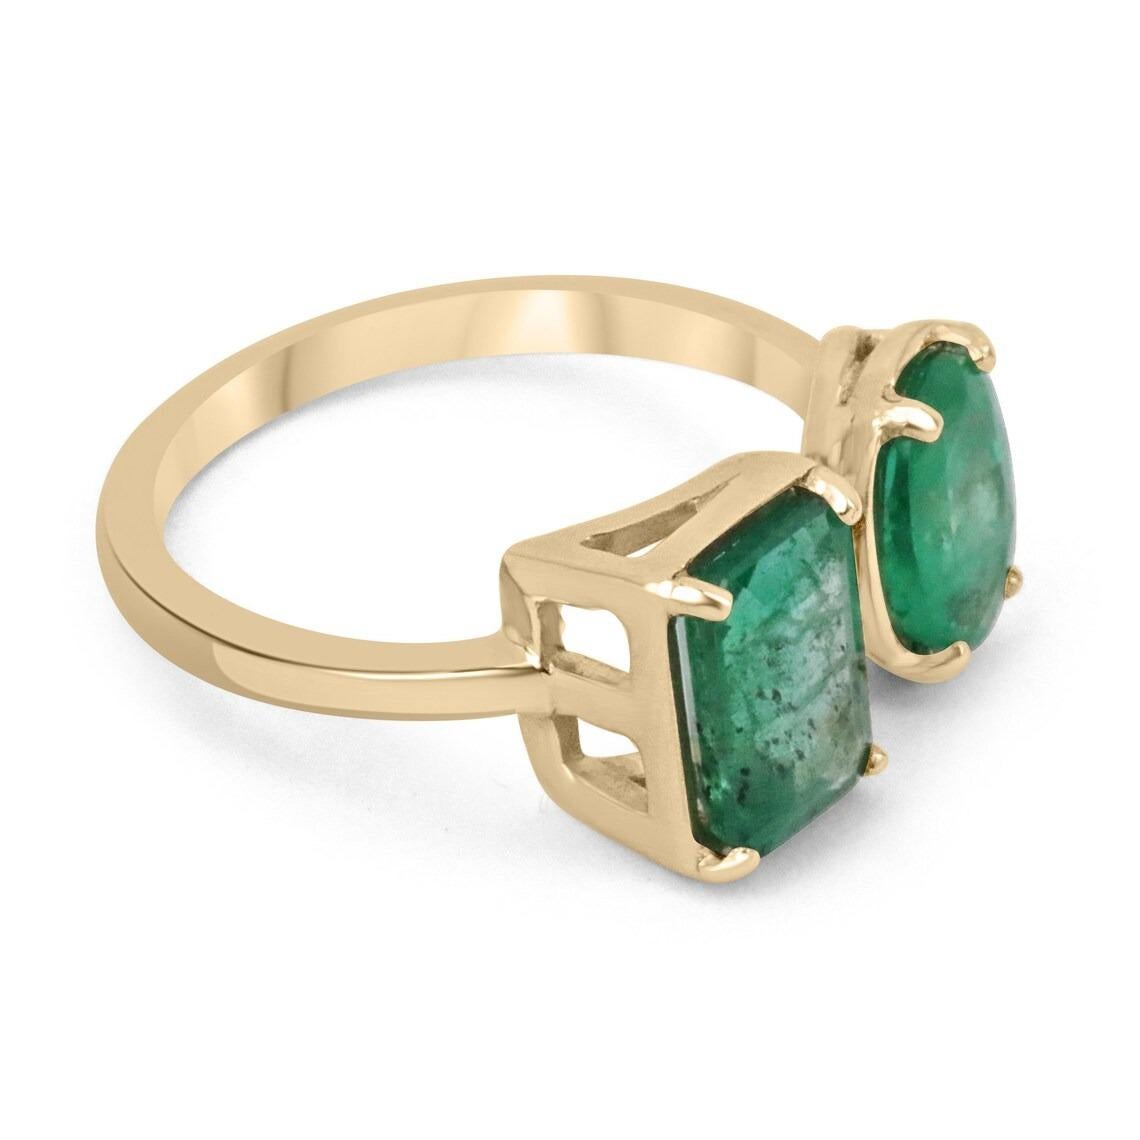 A stunning emerald cuff ring. This special and unique piece has two gorgeous emeralds. An emerald and oval cut emerald, showcasing remarkable characteristics, with an enchanting medium rich green color, and enthralling luster. Each stone is securely